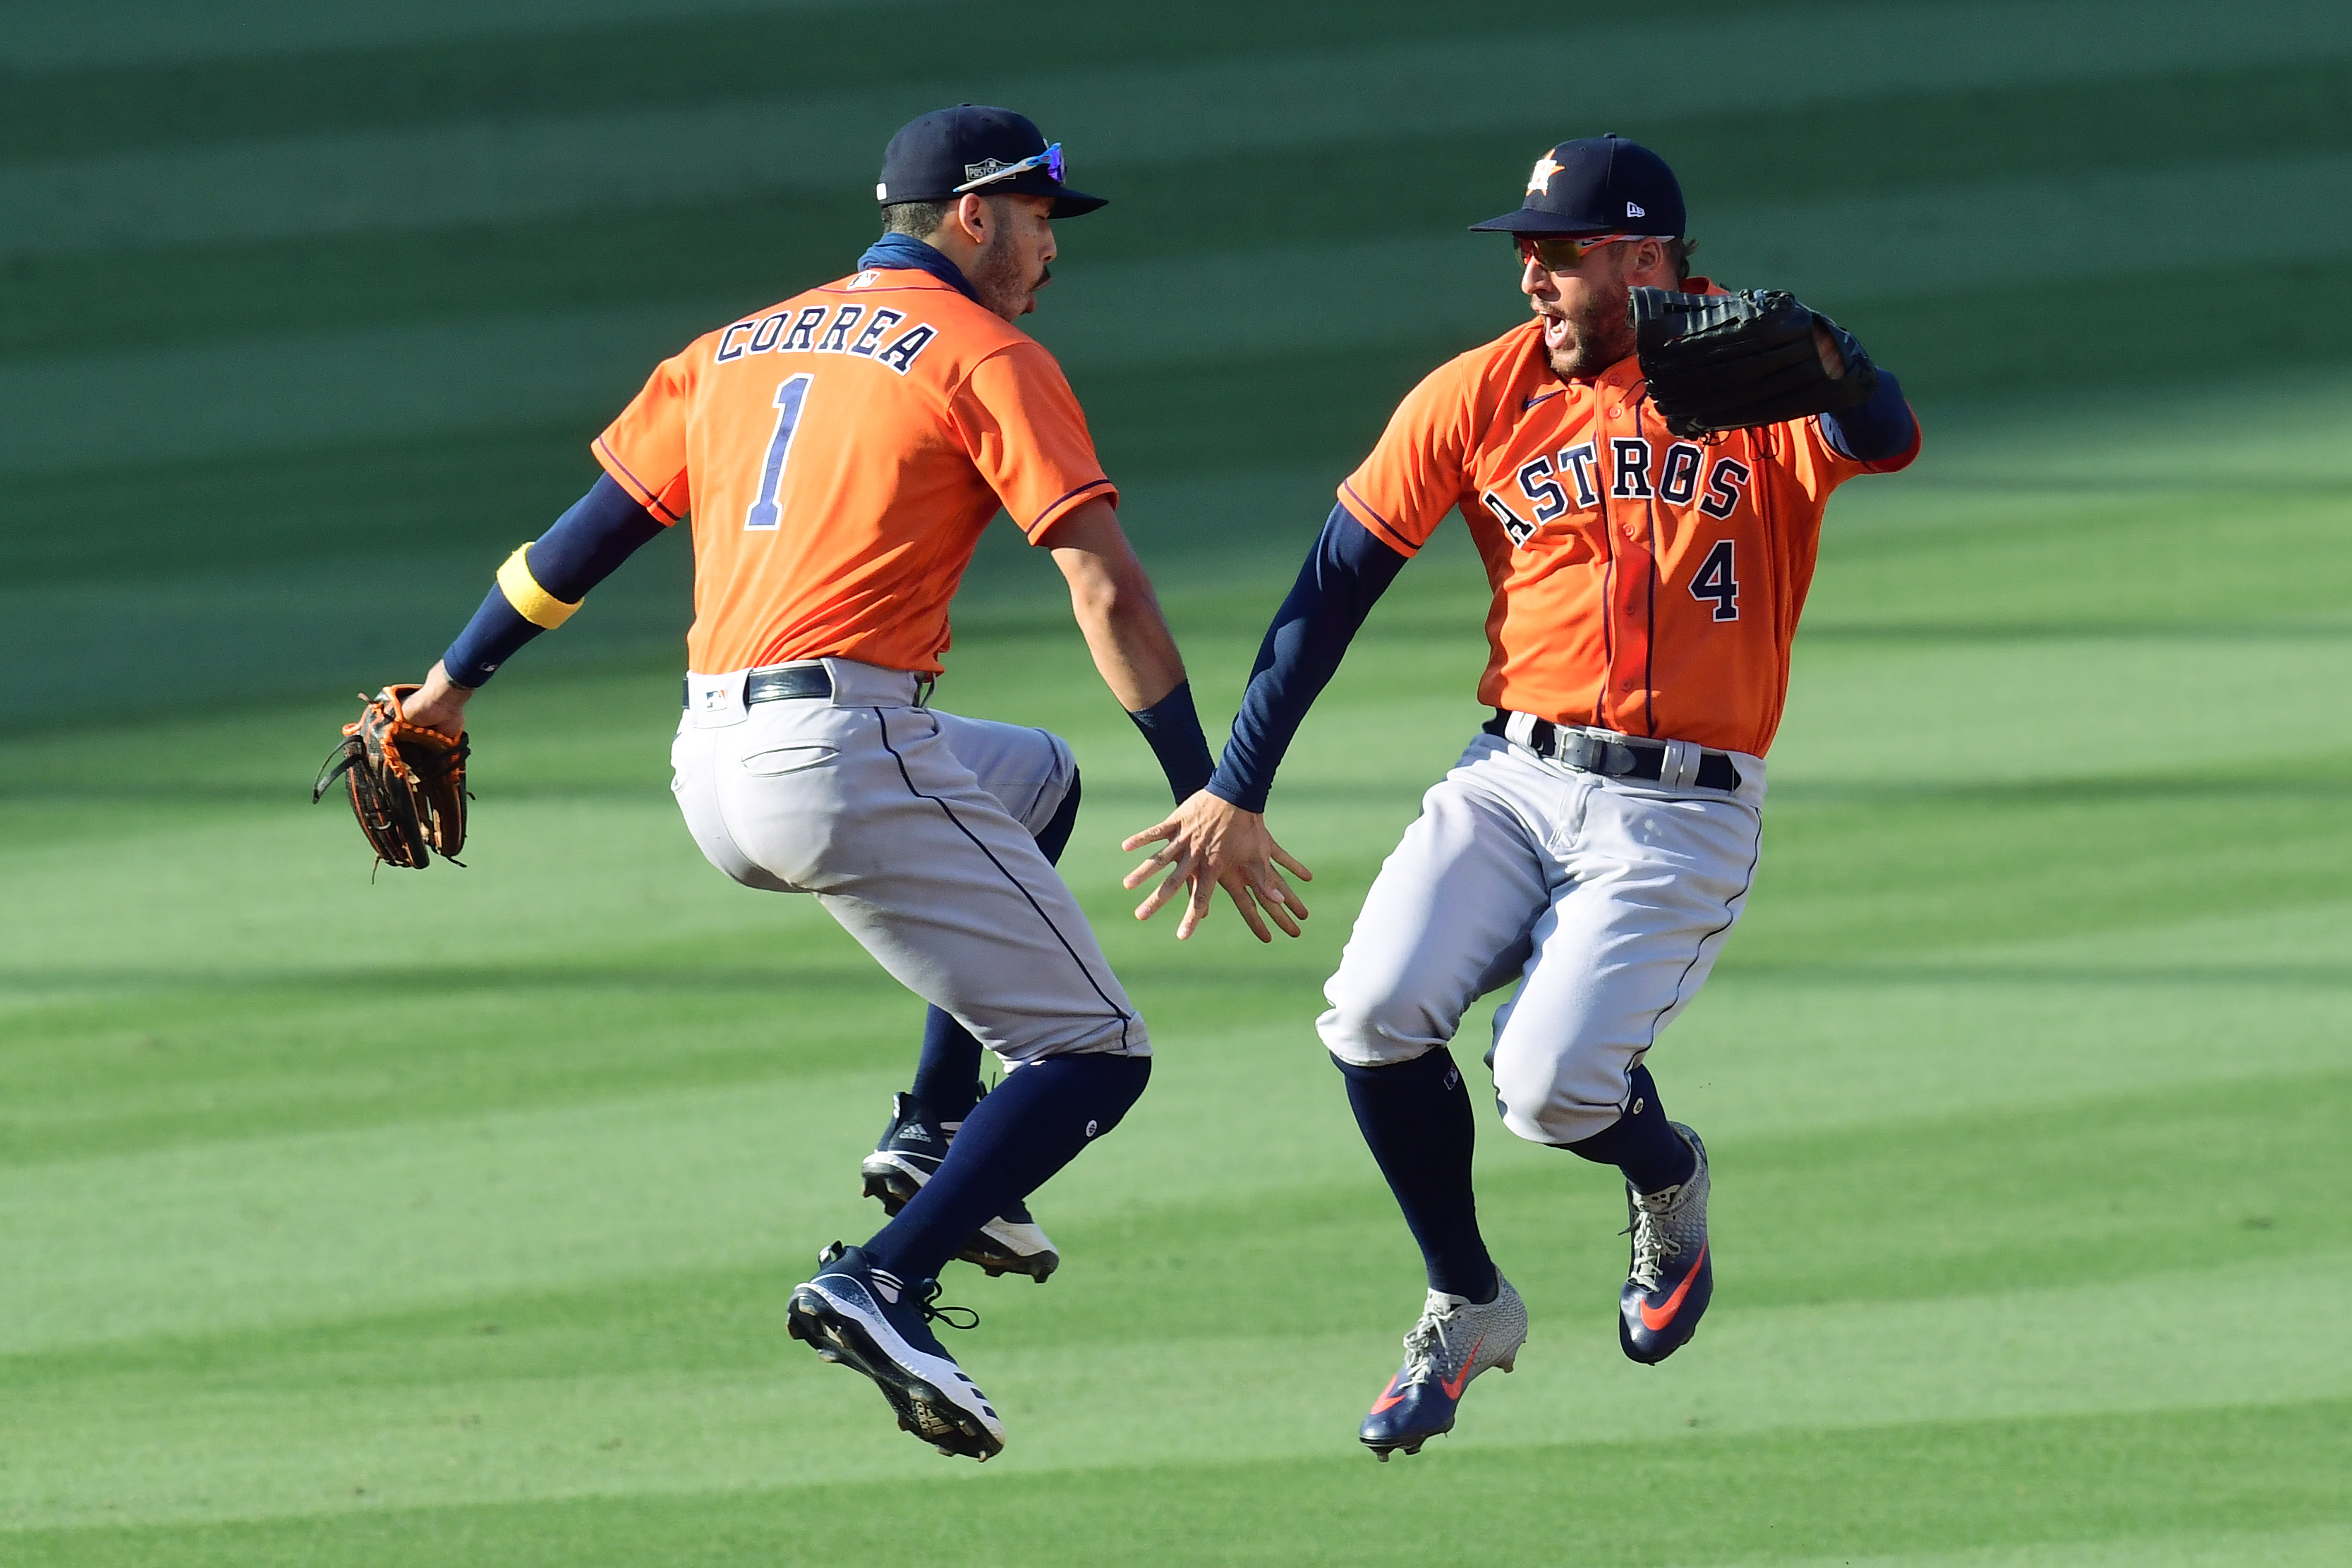 Carlos Correa finishes what George Springer starts